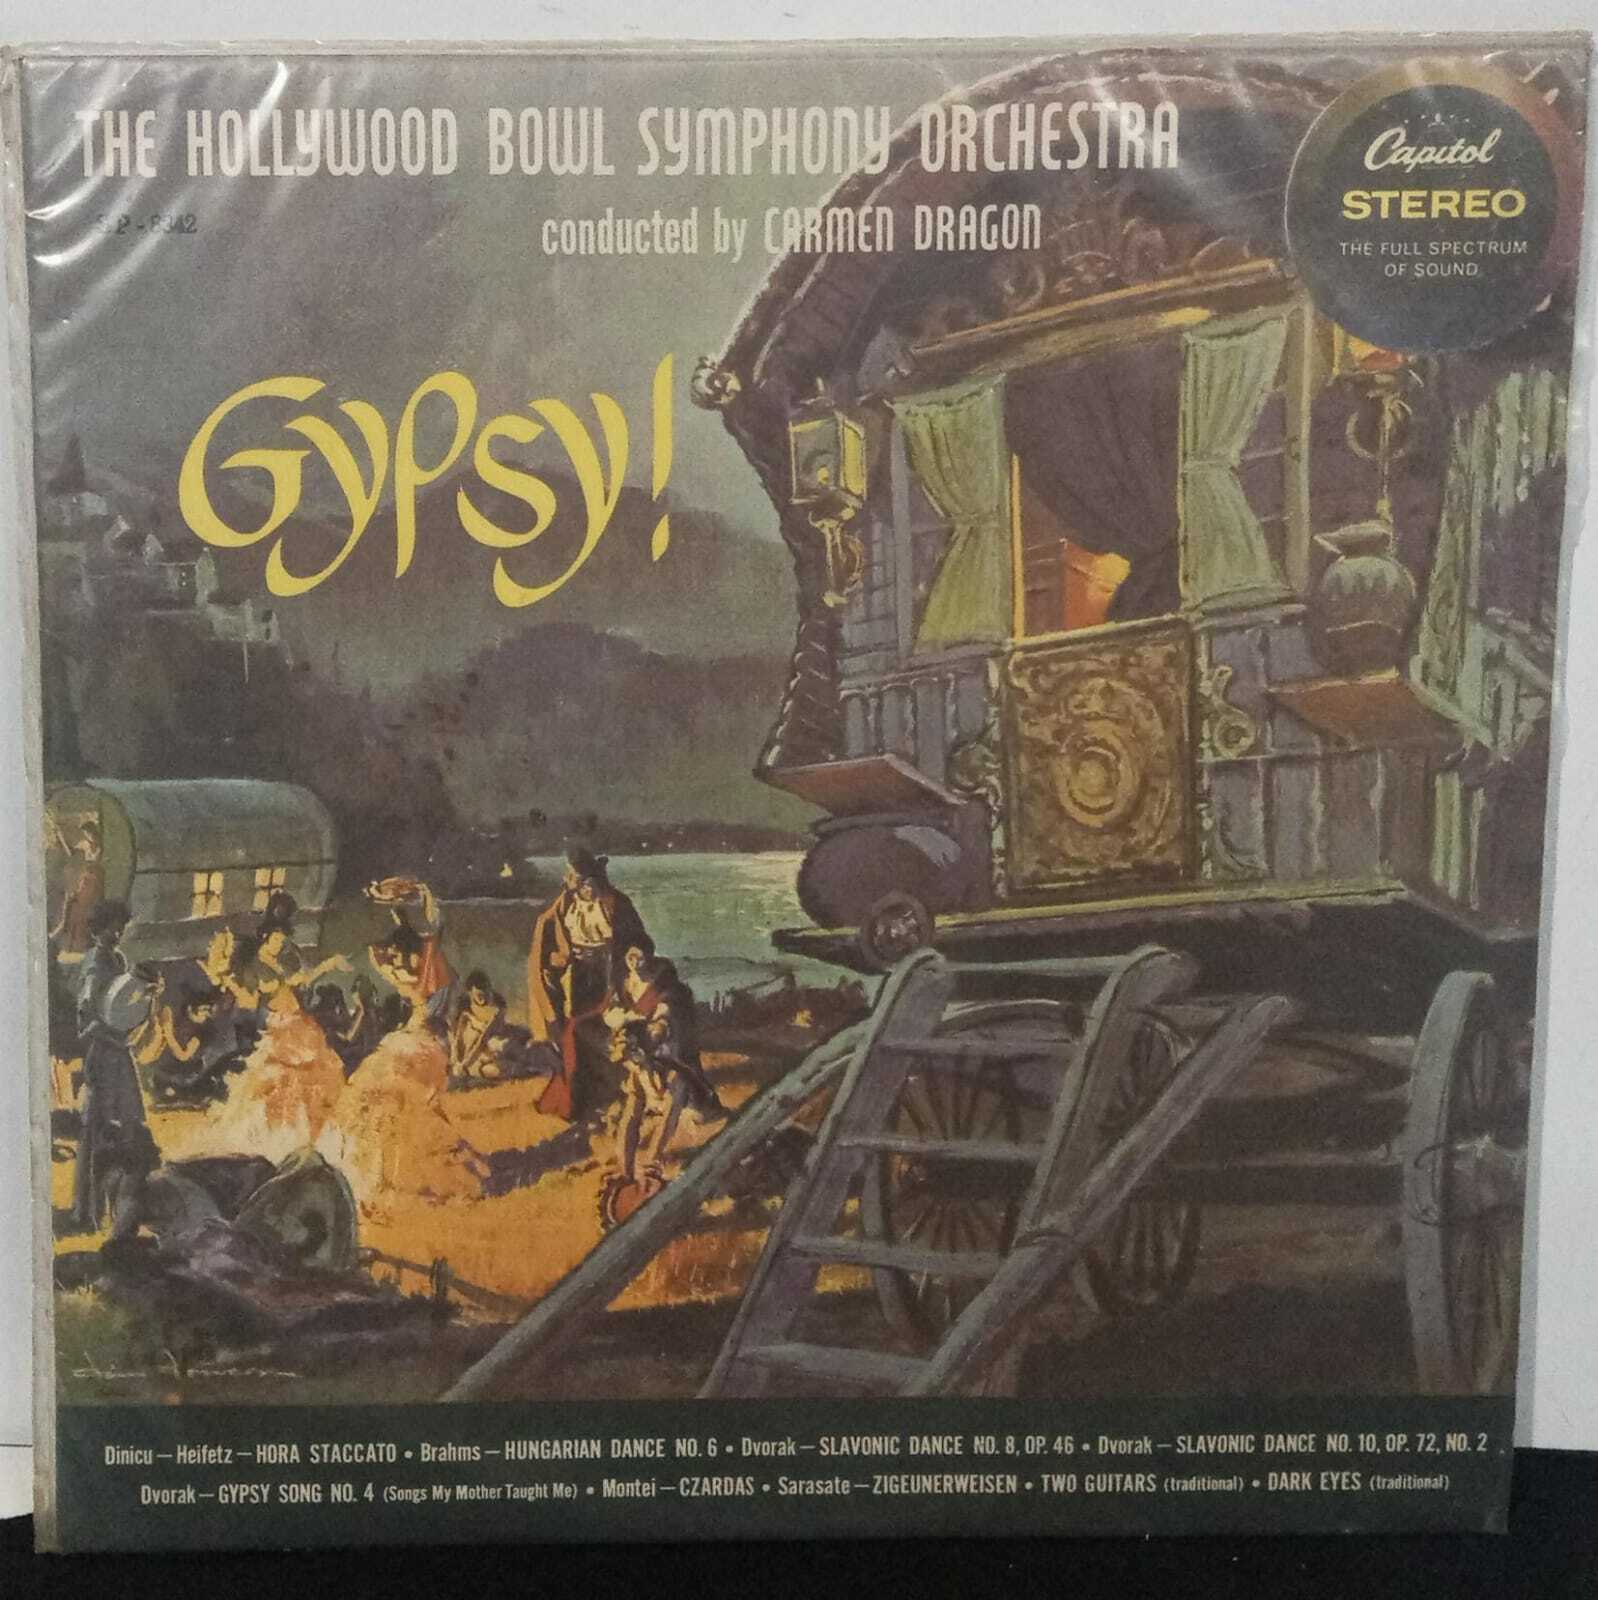 Vinil - Hollywood Bowl Symphony Orchestra The Conducted By Carmen Dragon - Gypsy